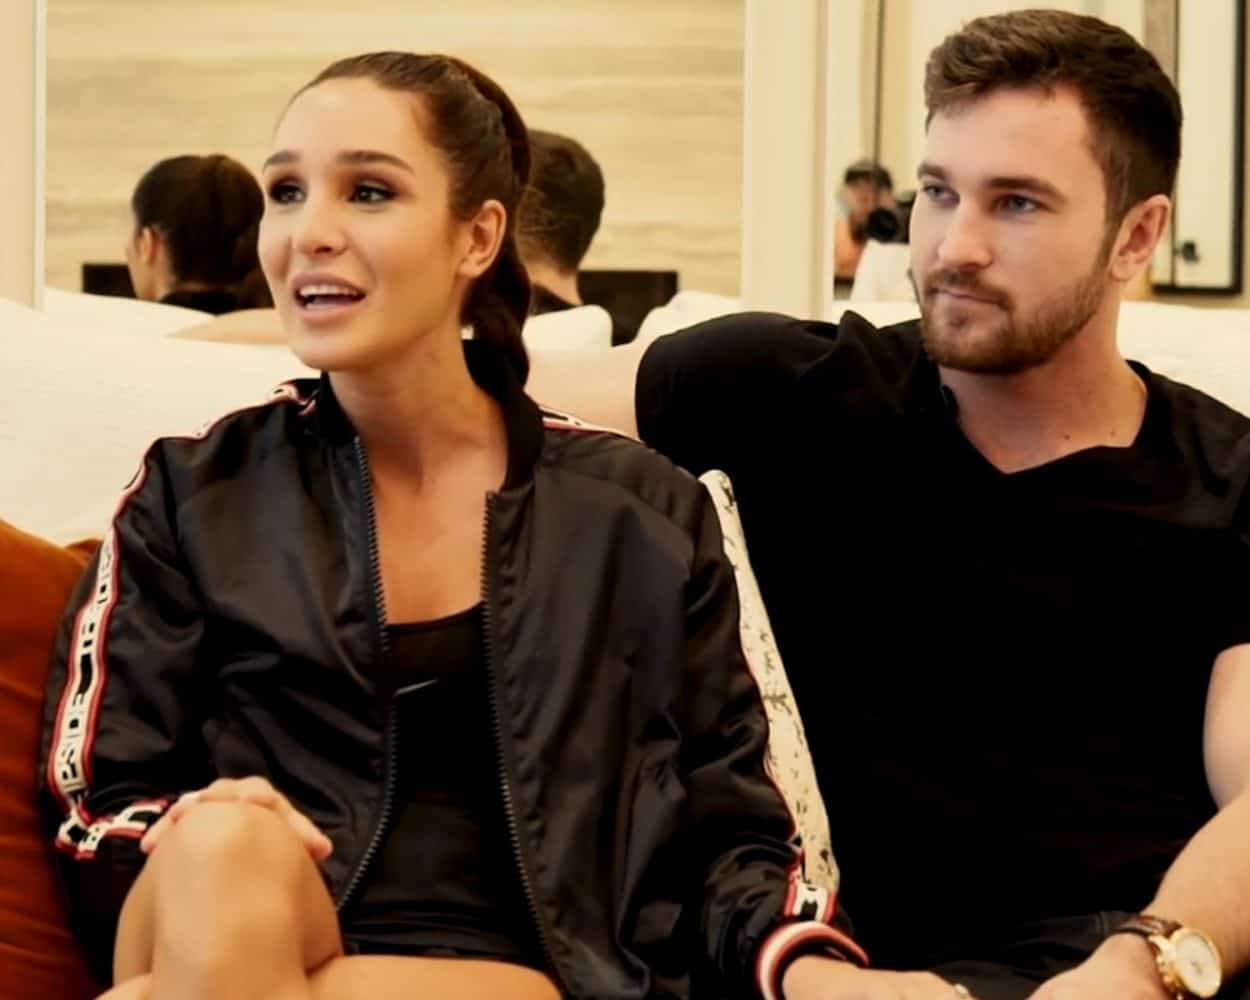 Sweating It Out: How Kayla Itsines and Tobi Pearce Became Australia’s Wealthiest Self-Made Couple under 30